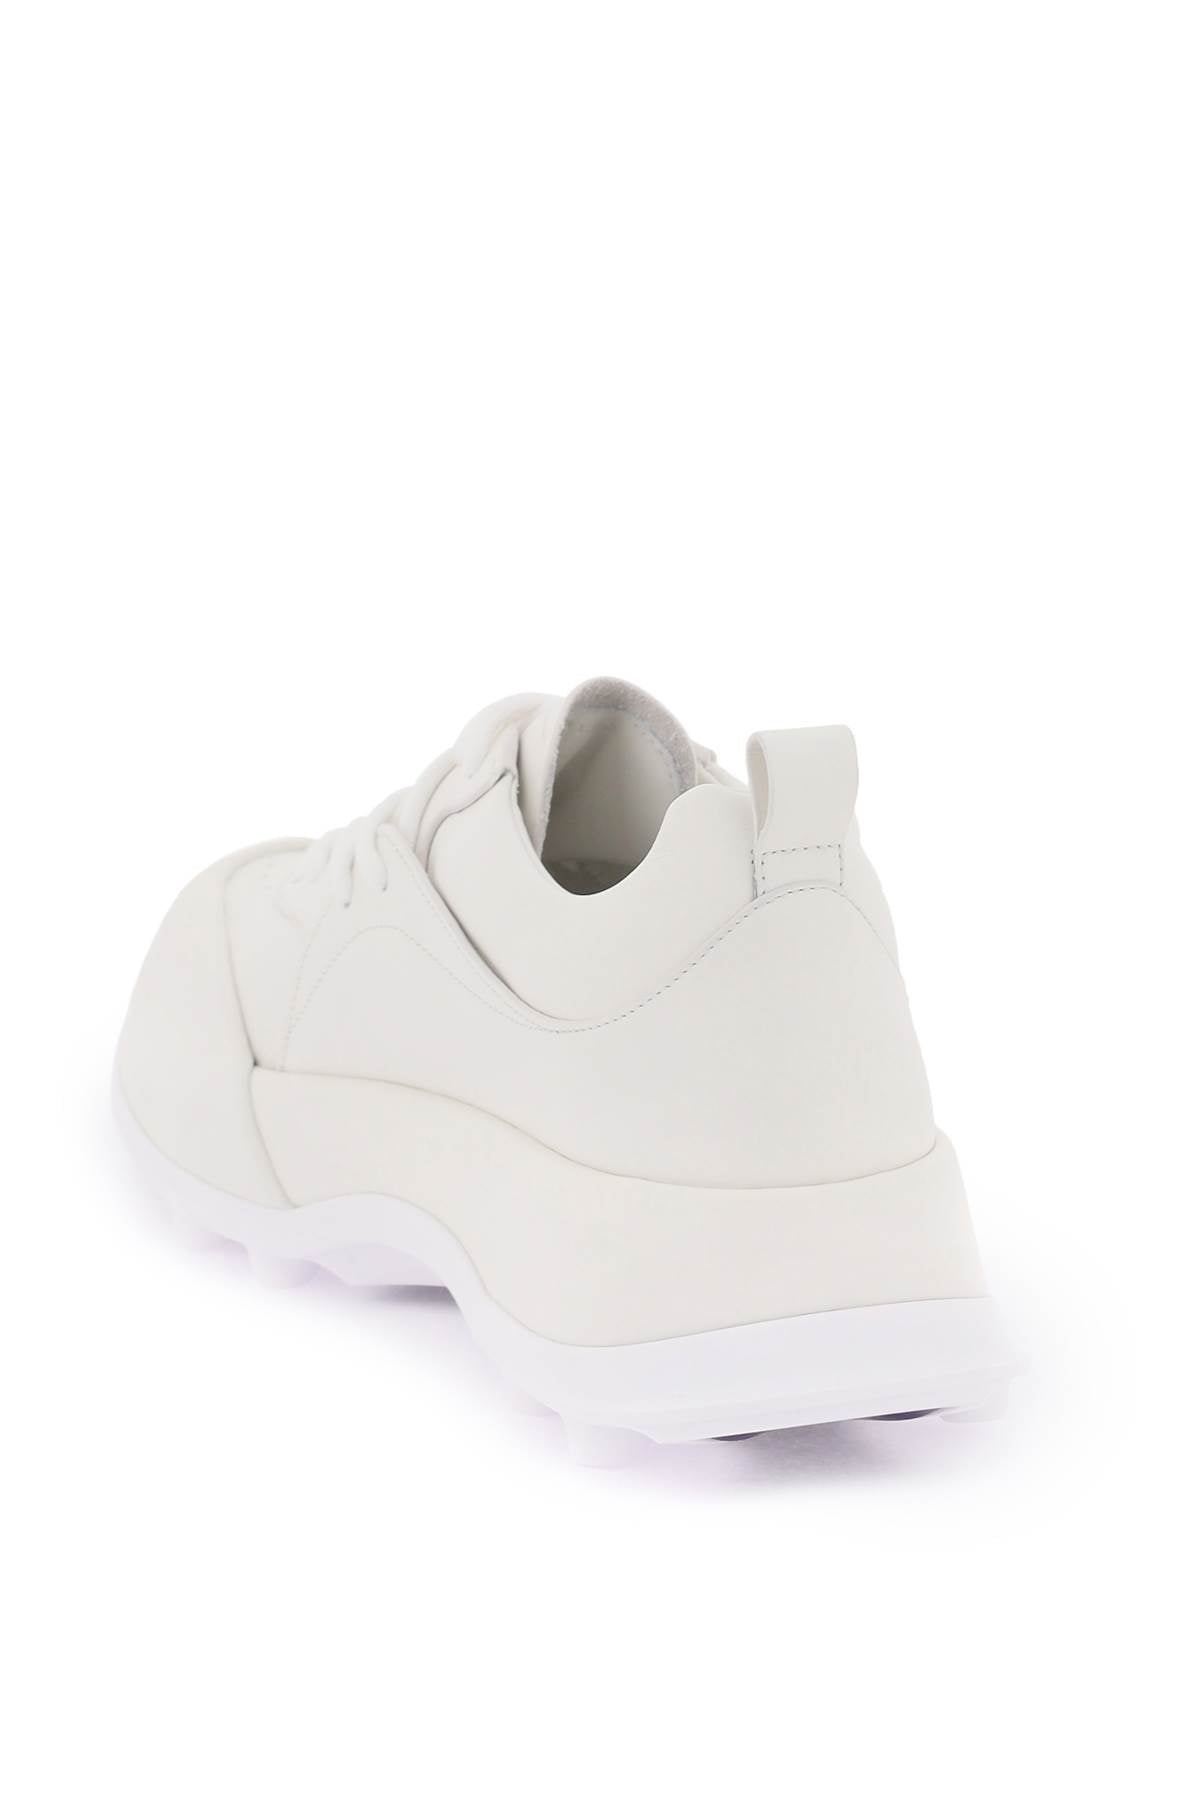 JIL SANDER ORB LOW-TOP Leather Sneakers for Men - White